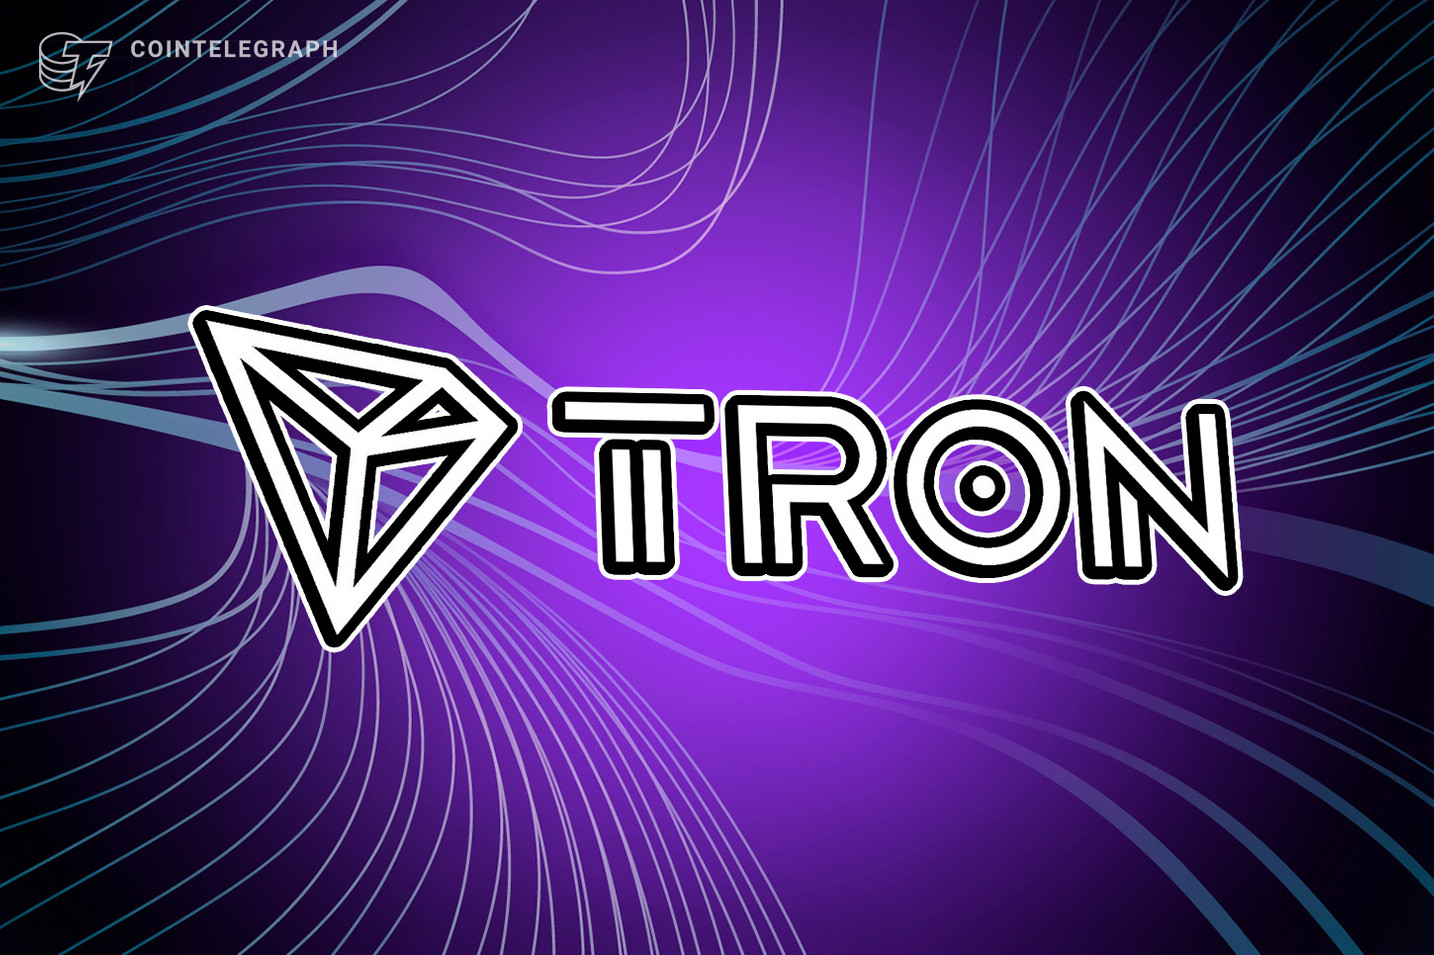 TRON’s mission to create an internet for all, defining decentralization